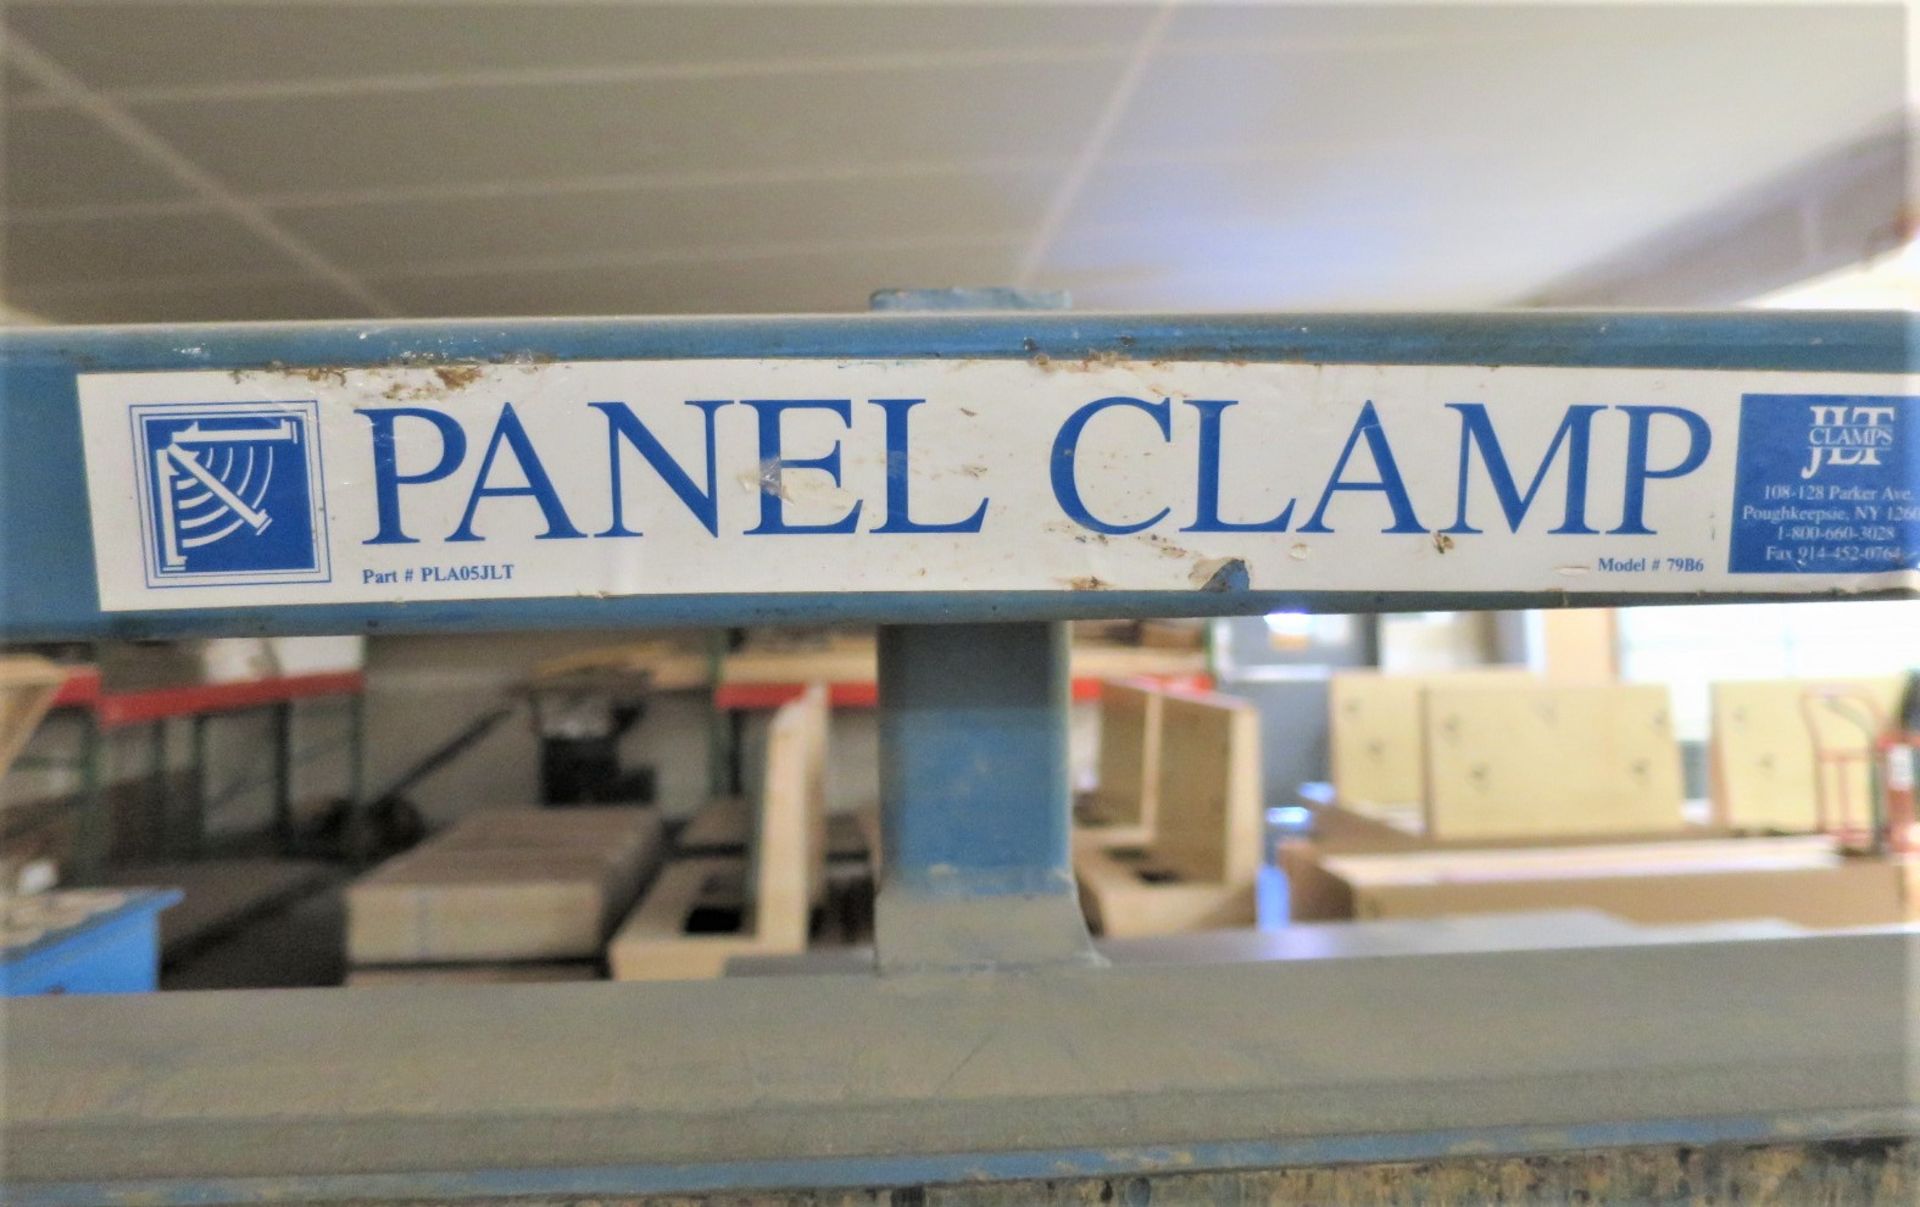 Panel Clamp Model 79B6 12' Table with approx. (30) clamps - Image 2 of 3